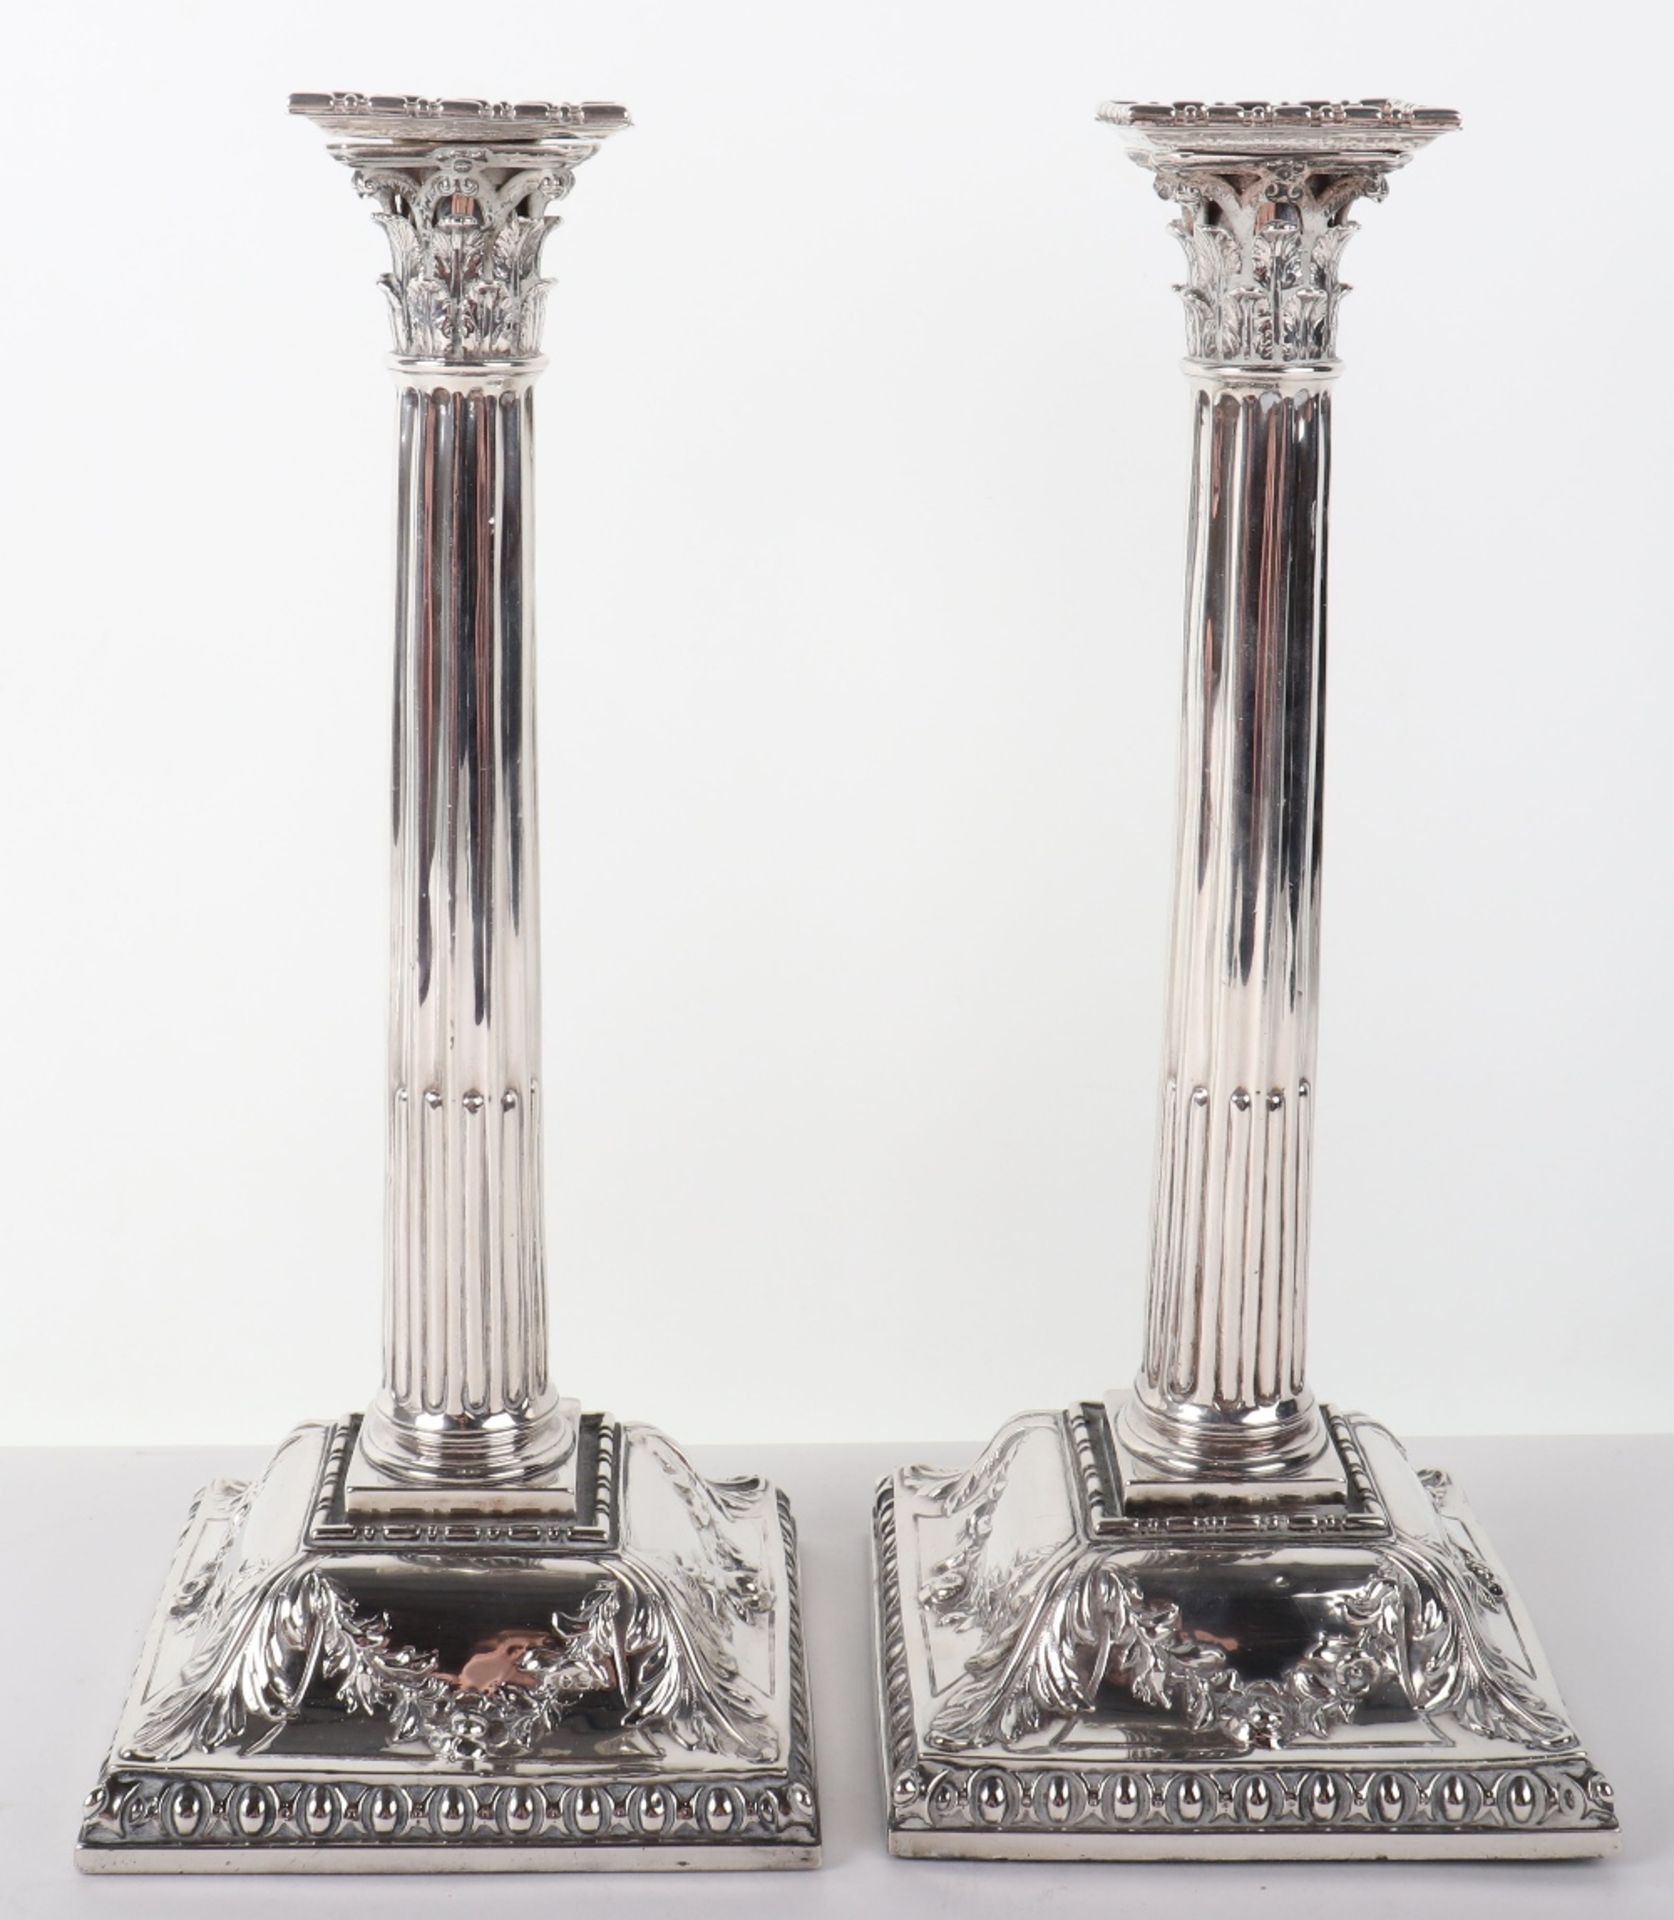 A pair of large George II candlesticks, London 1756